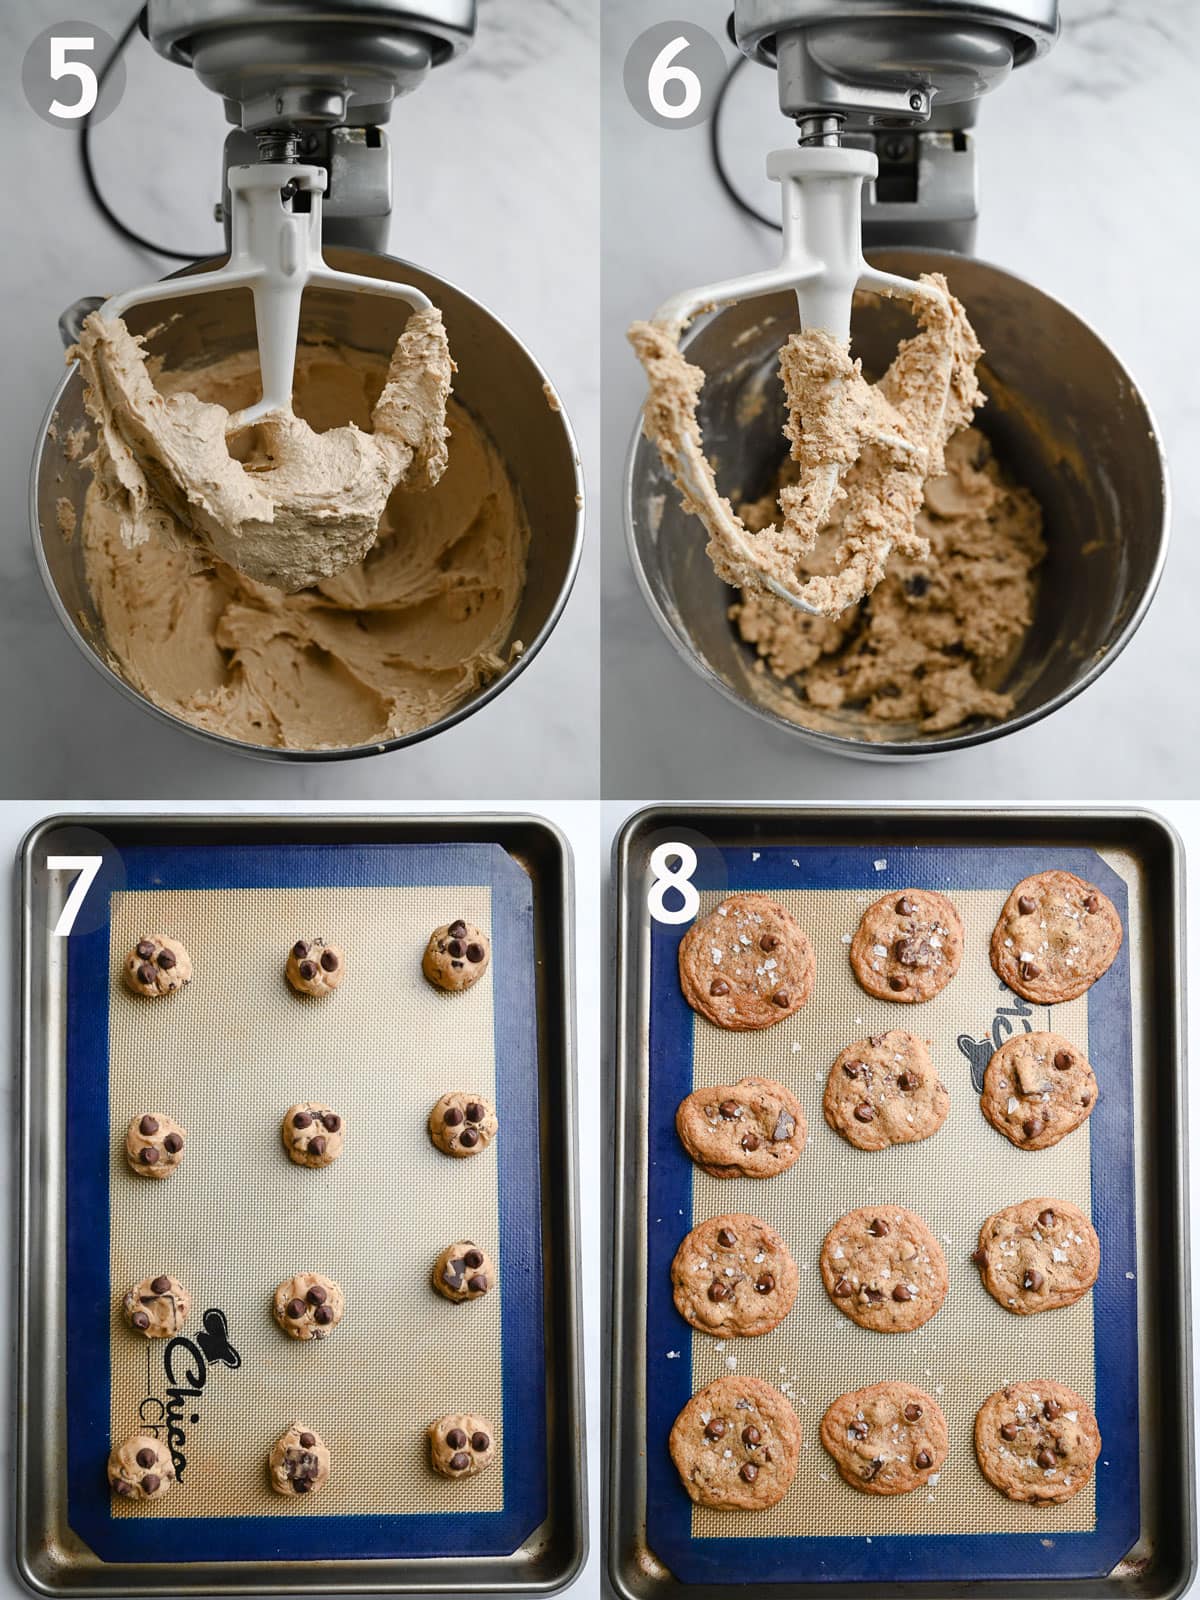 Steps of making cookies including combining the wet and dry ingredients, adding chocolate chips and baking cookies.